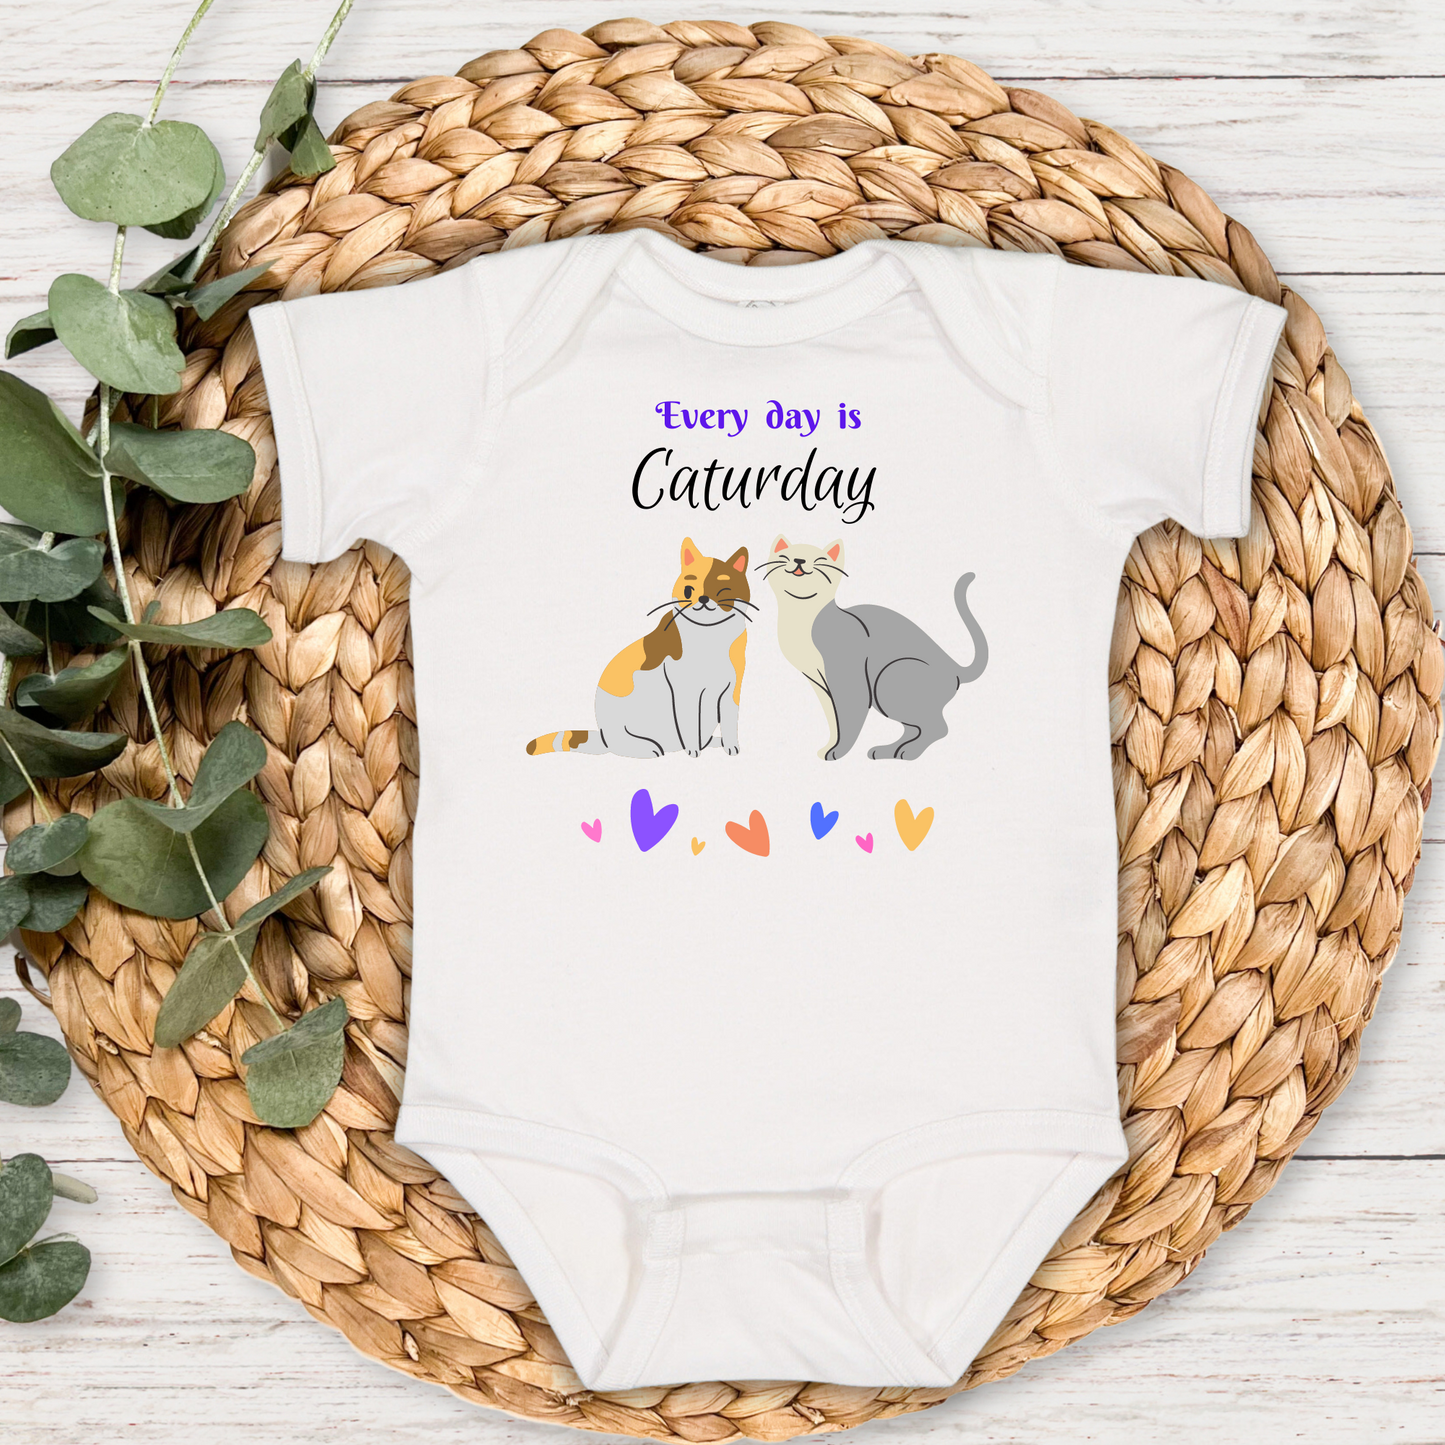 "Cat-Lady Grandma" Baby Bodysuit, "Every day is Caturday" Design, Cat Lover Mom Gift, 4 Colors